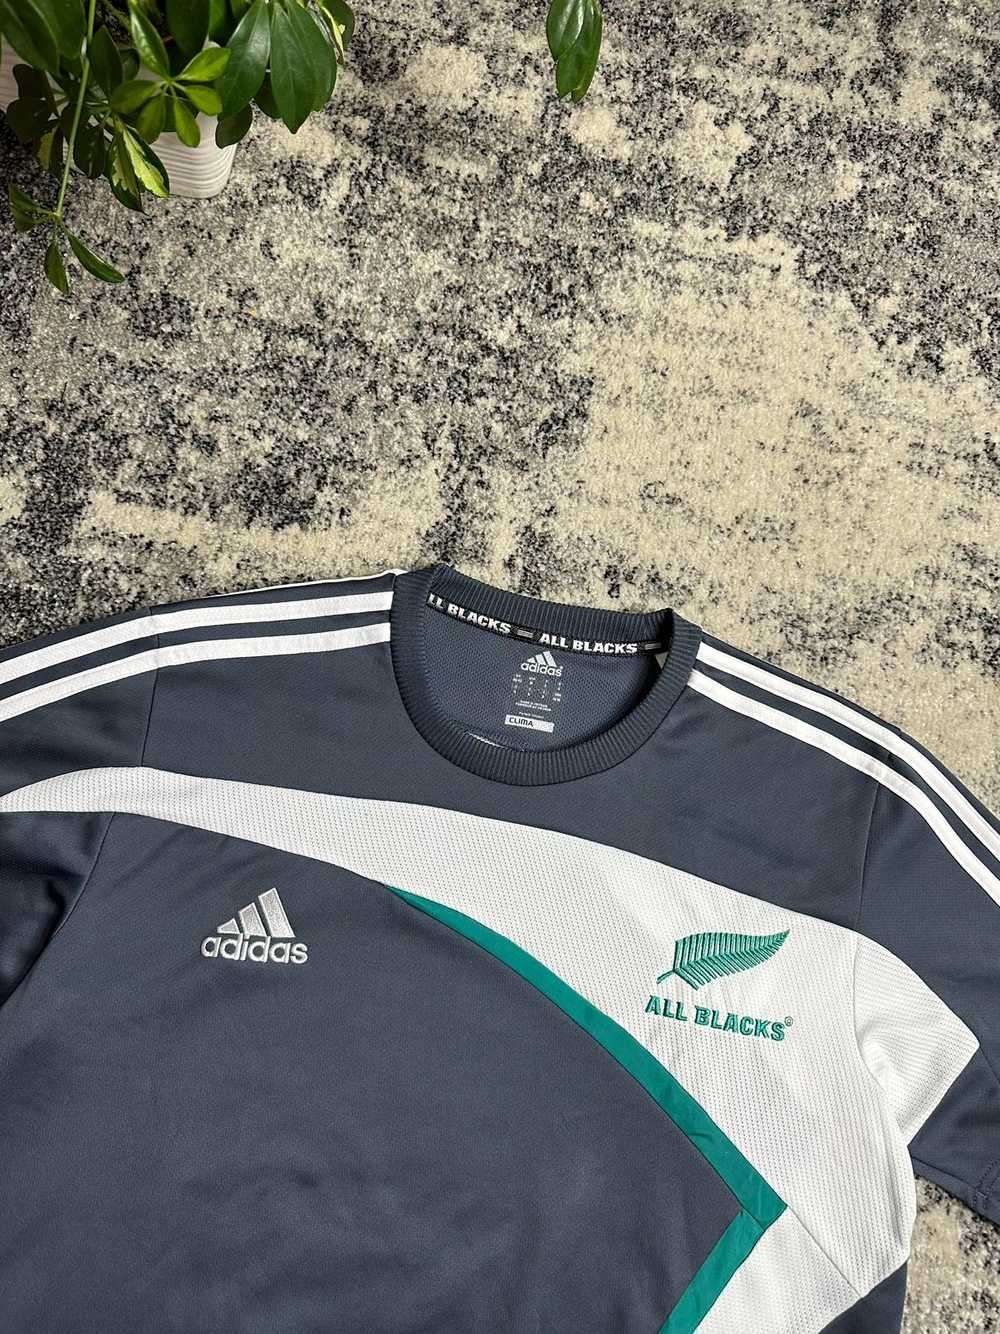 Adidas × Jersey × Soccer Jersey Adidas Rugby All … - image 2